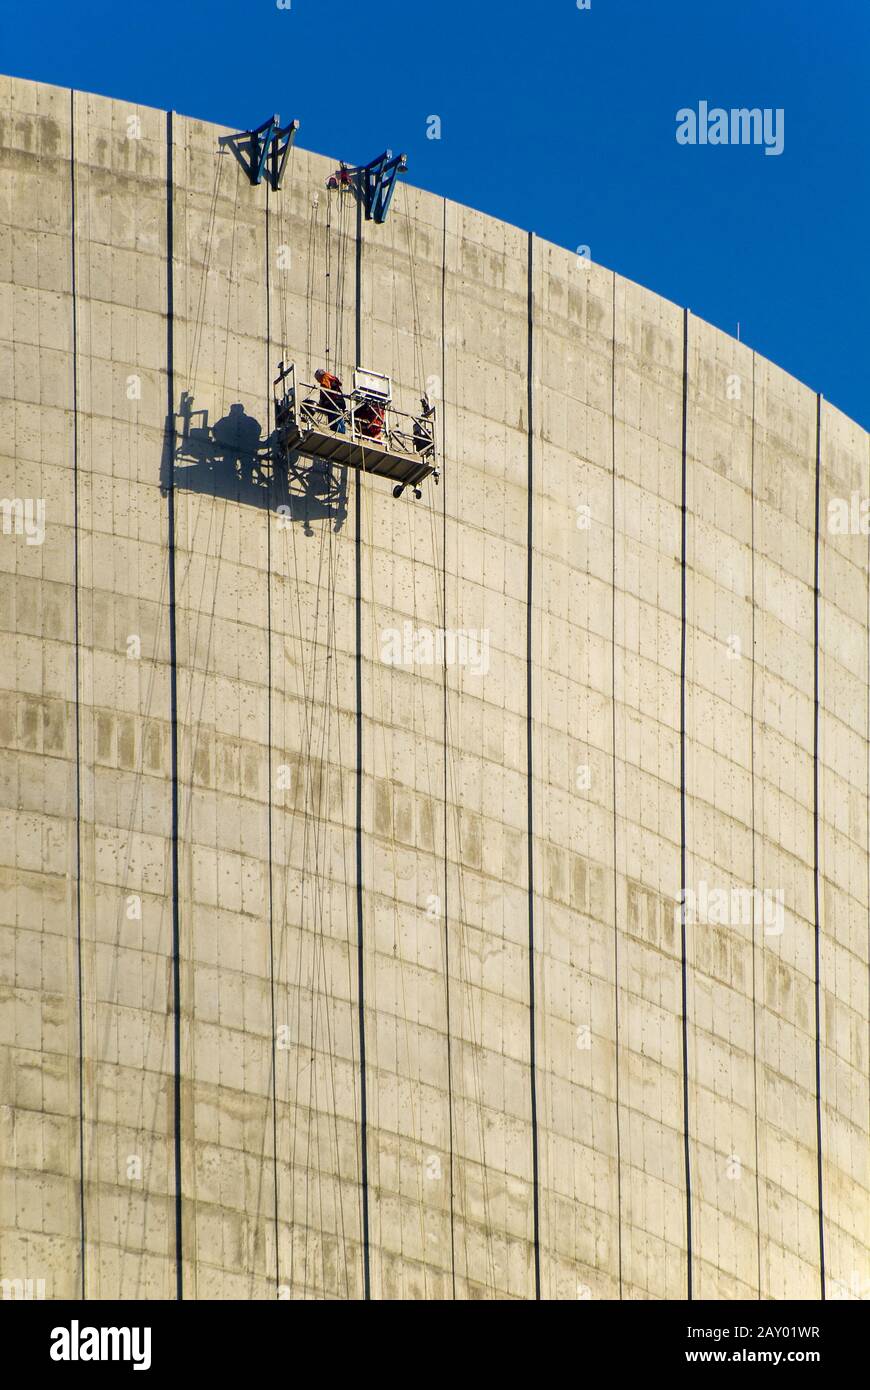 Construction worker in a lift on the outer wall of a cooling tower Stock Photo